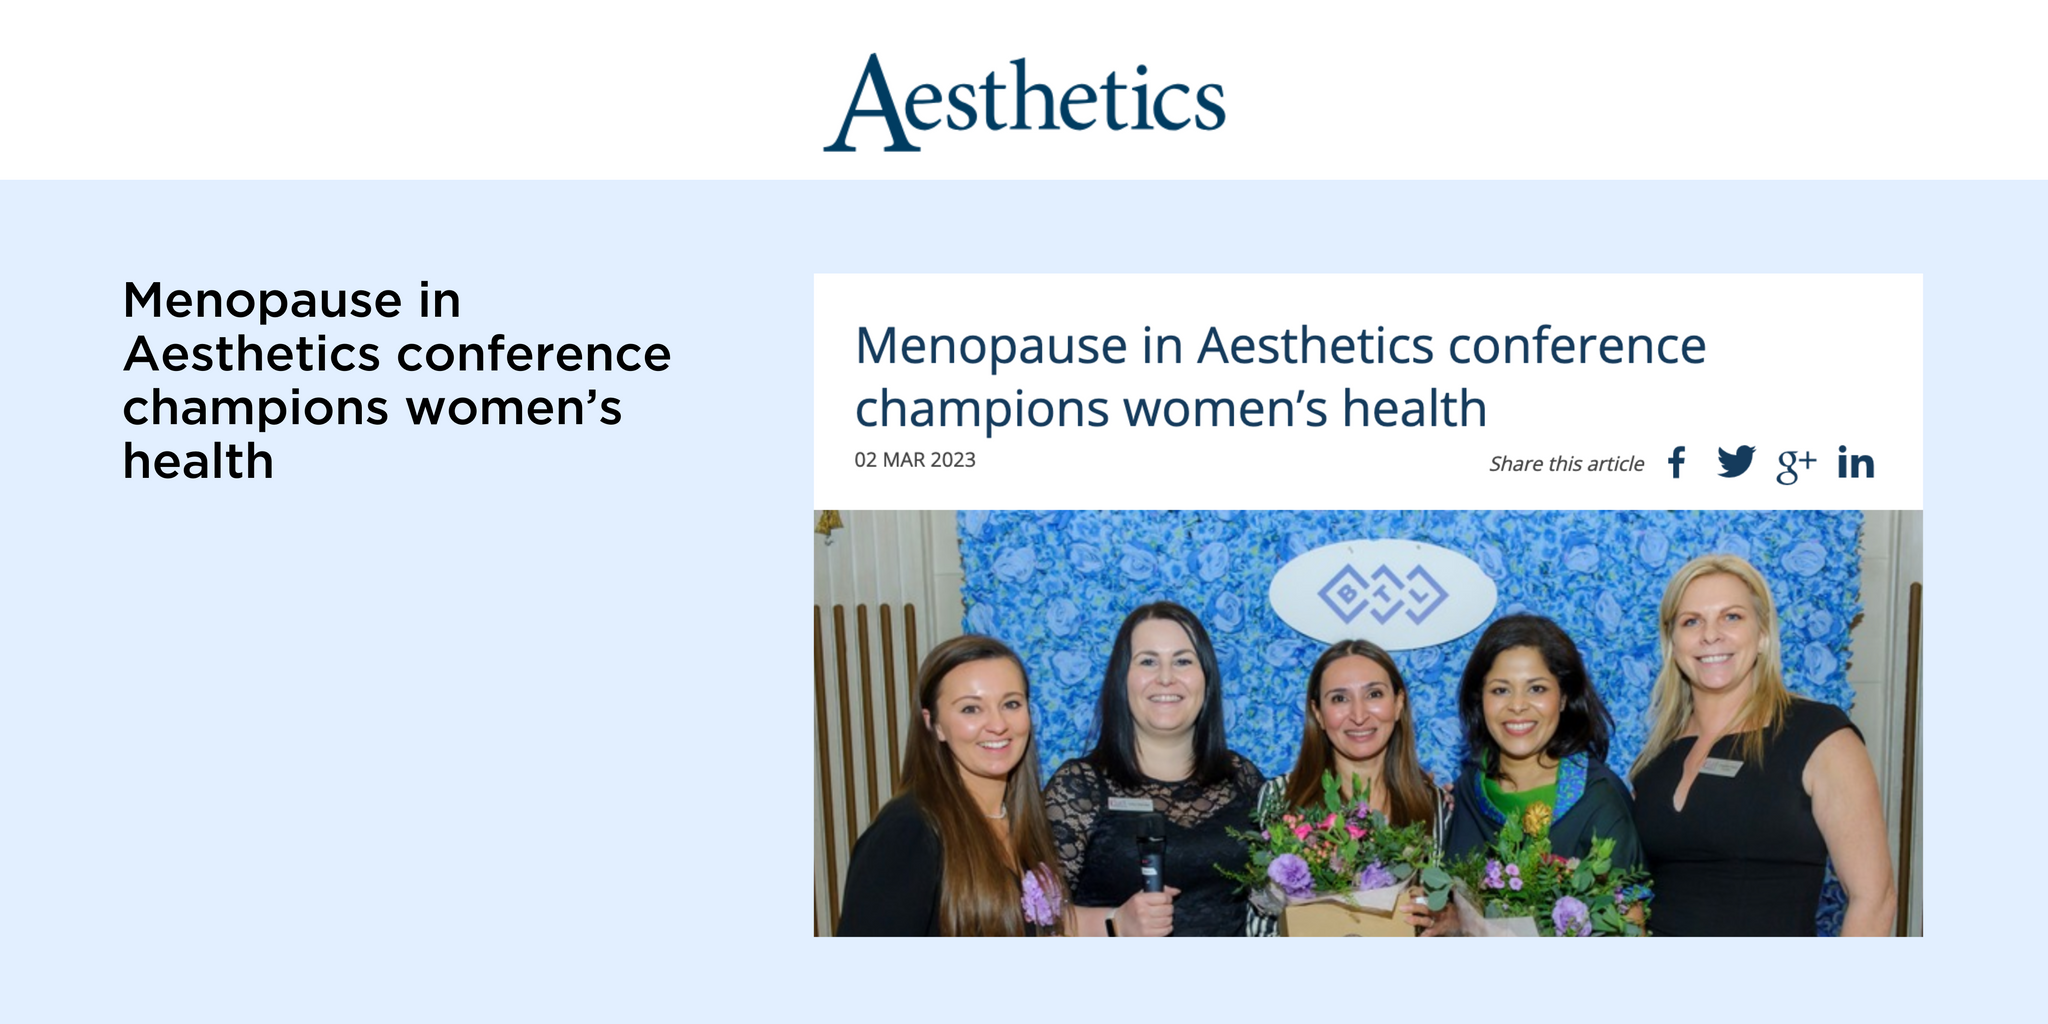 Menopause in Aesthetics conference champions women’s health